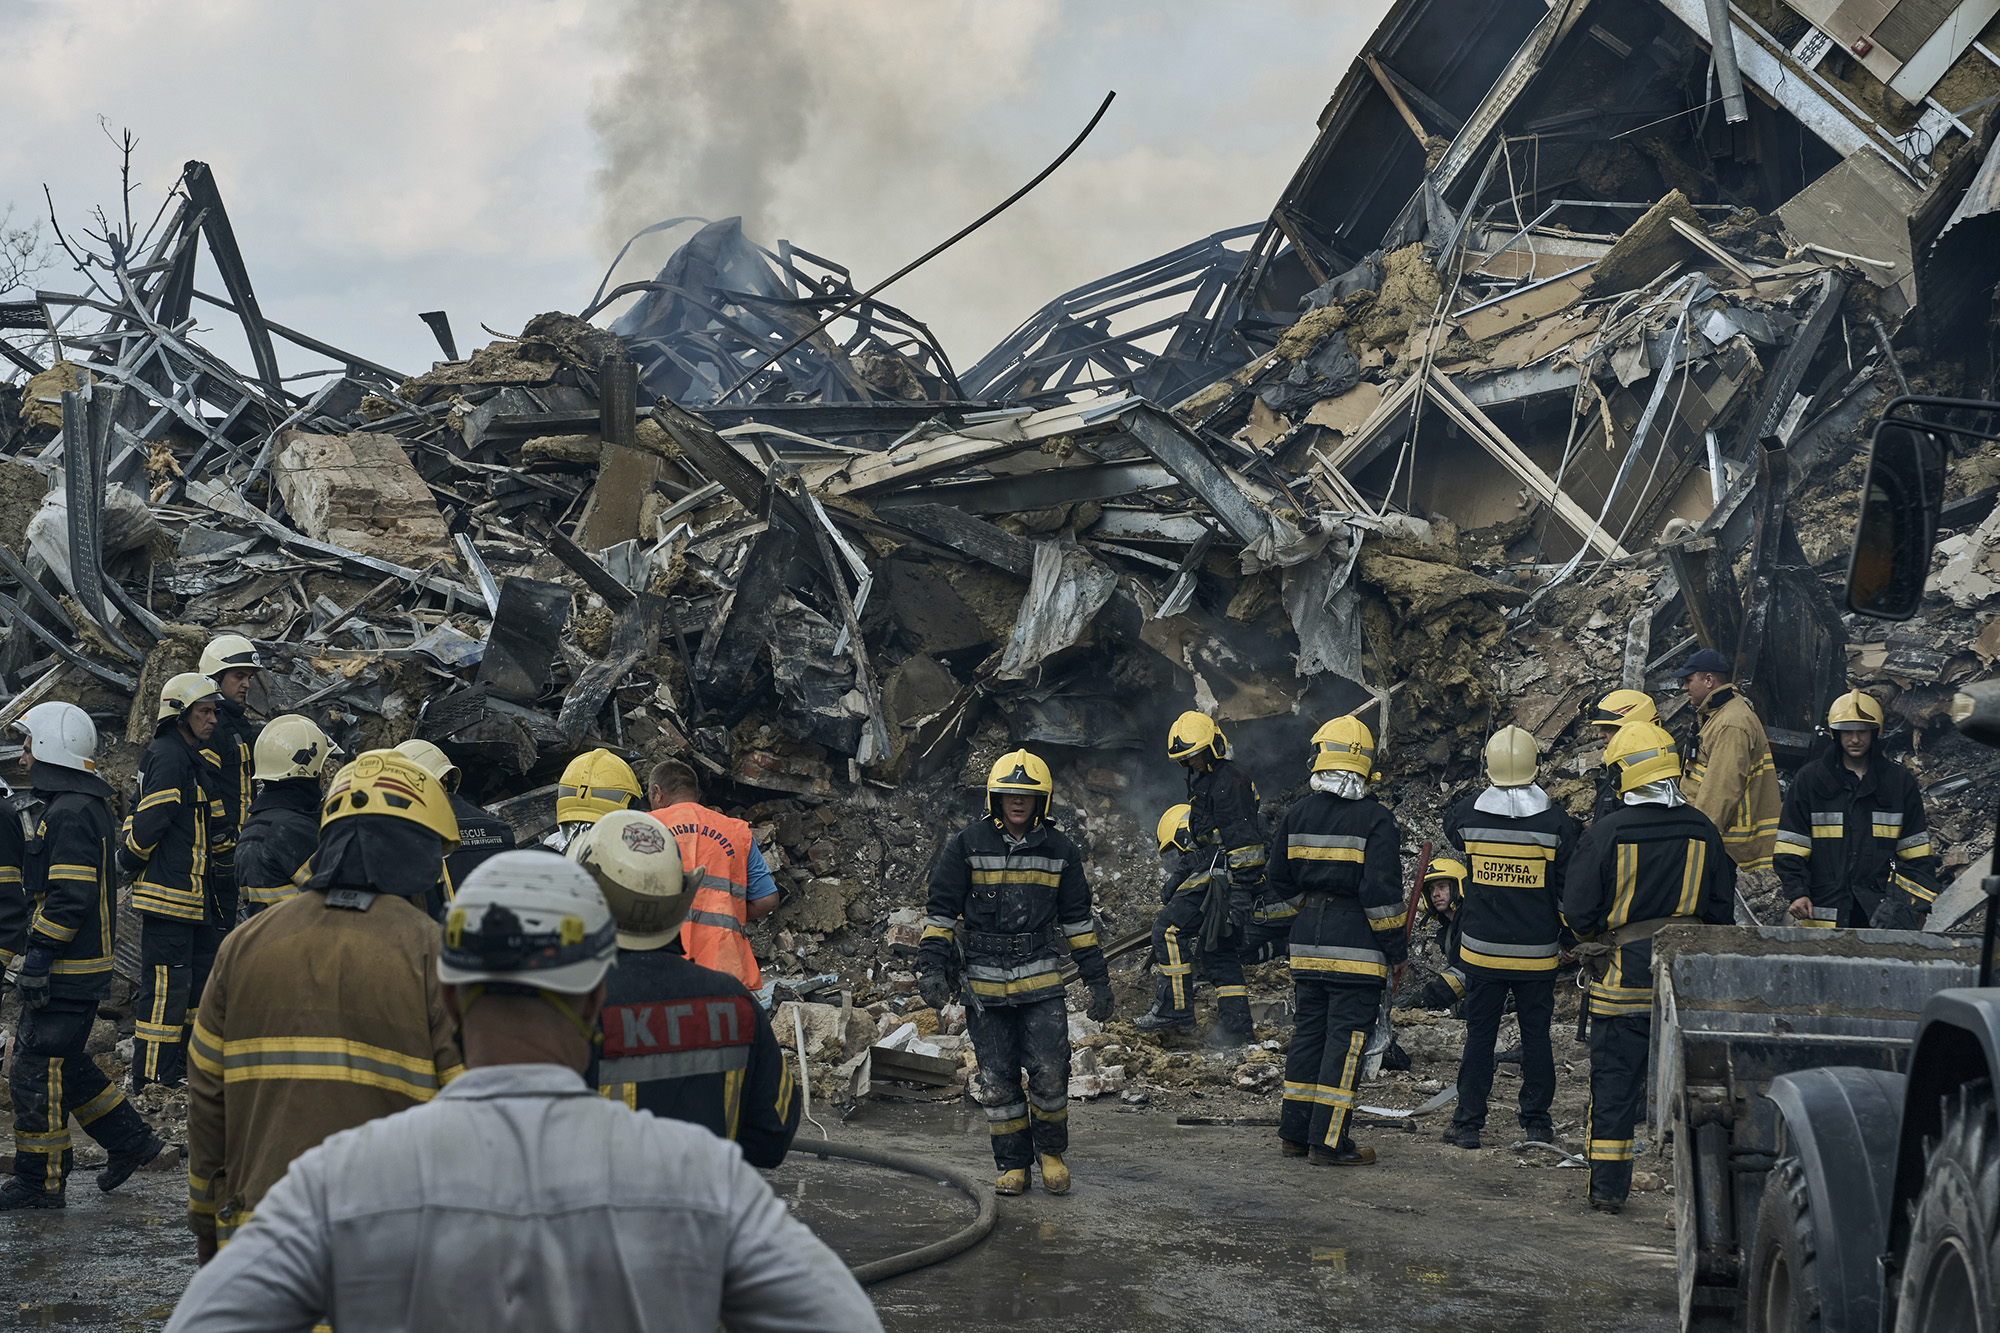 Emergency service personnel work at the site of a destroyed building after a Russian attack in Odesa, Ukraine, on July 20.